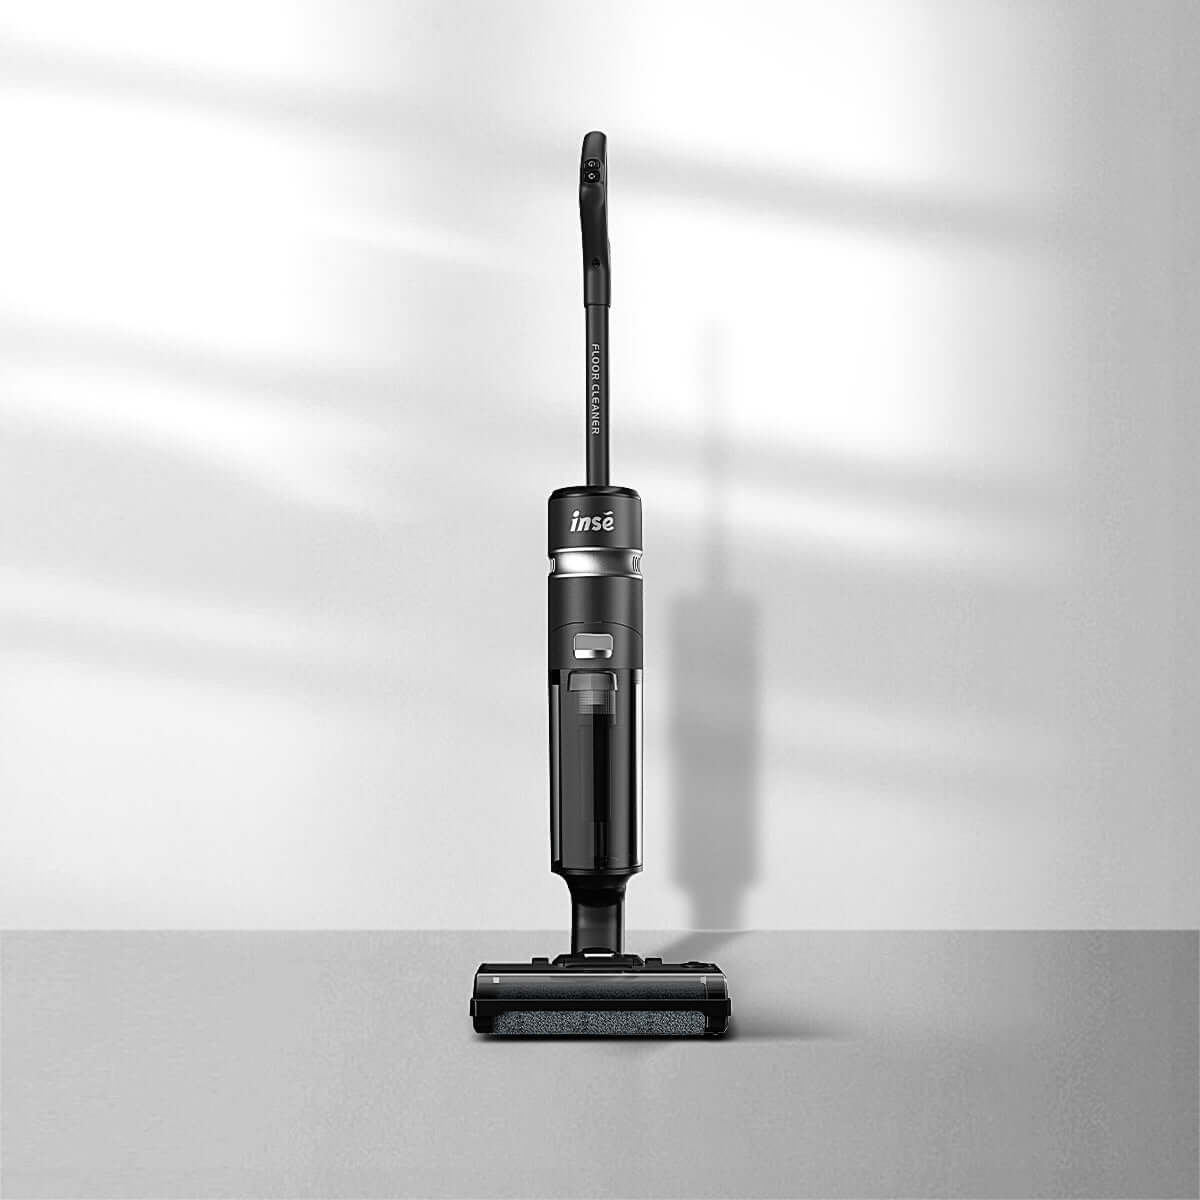 inse wet dry vacuum collection-inse w5 vacuum and mop all in one-inselife.com